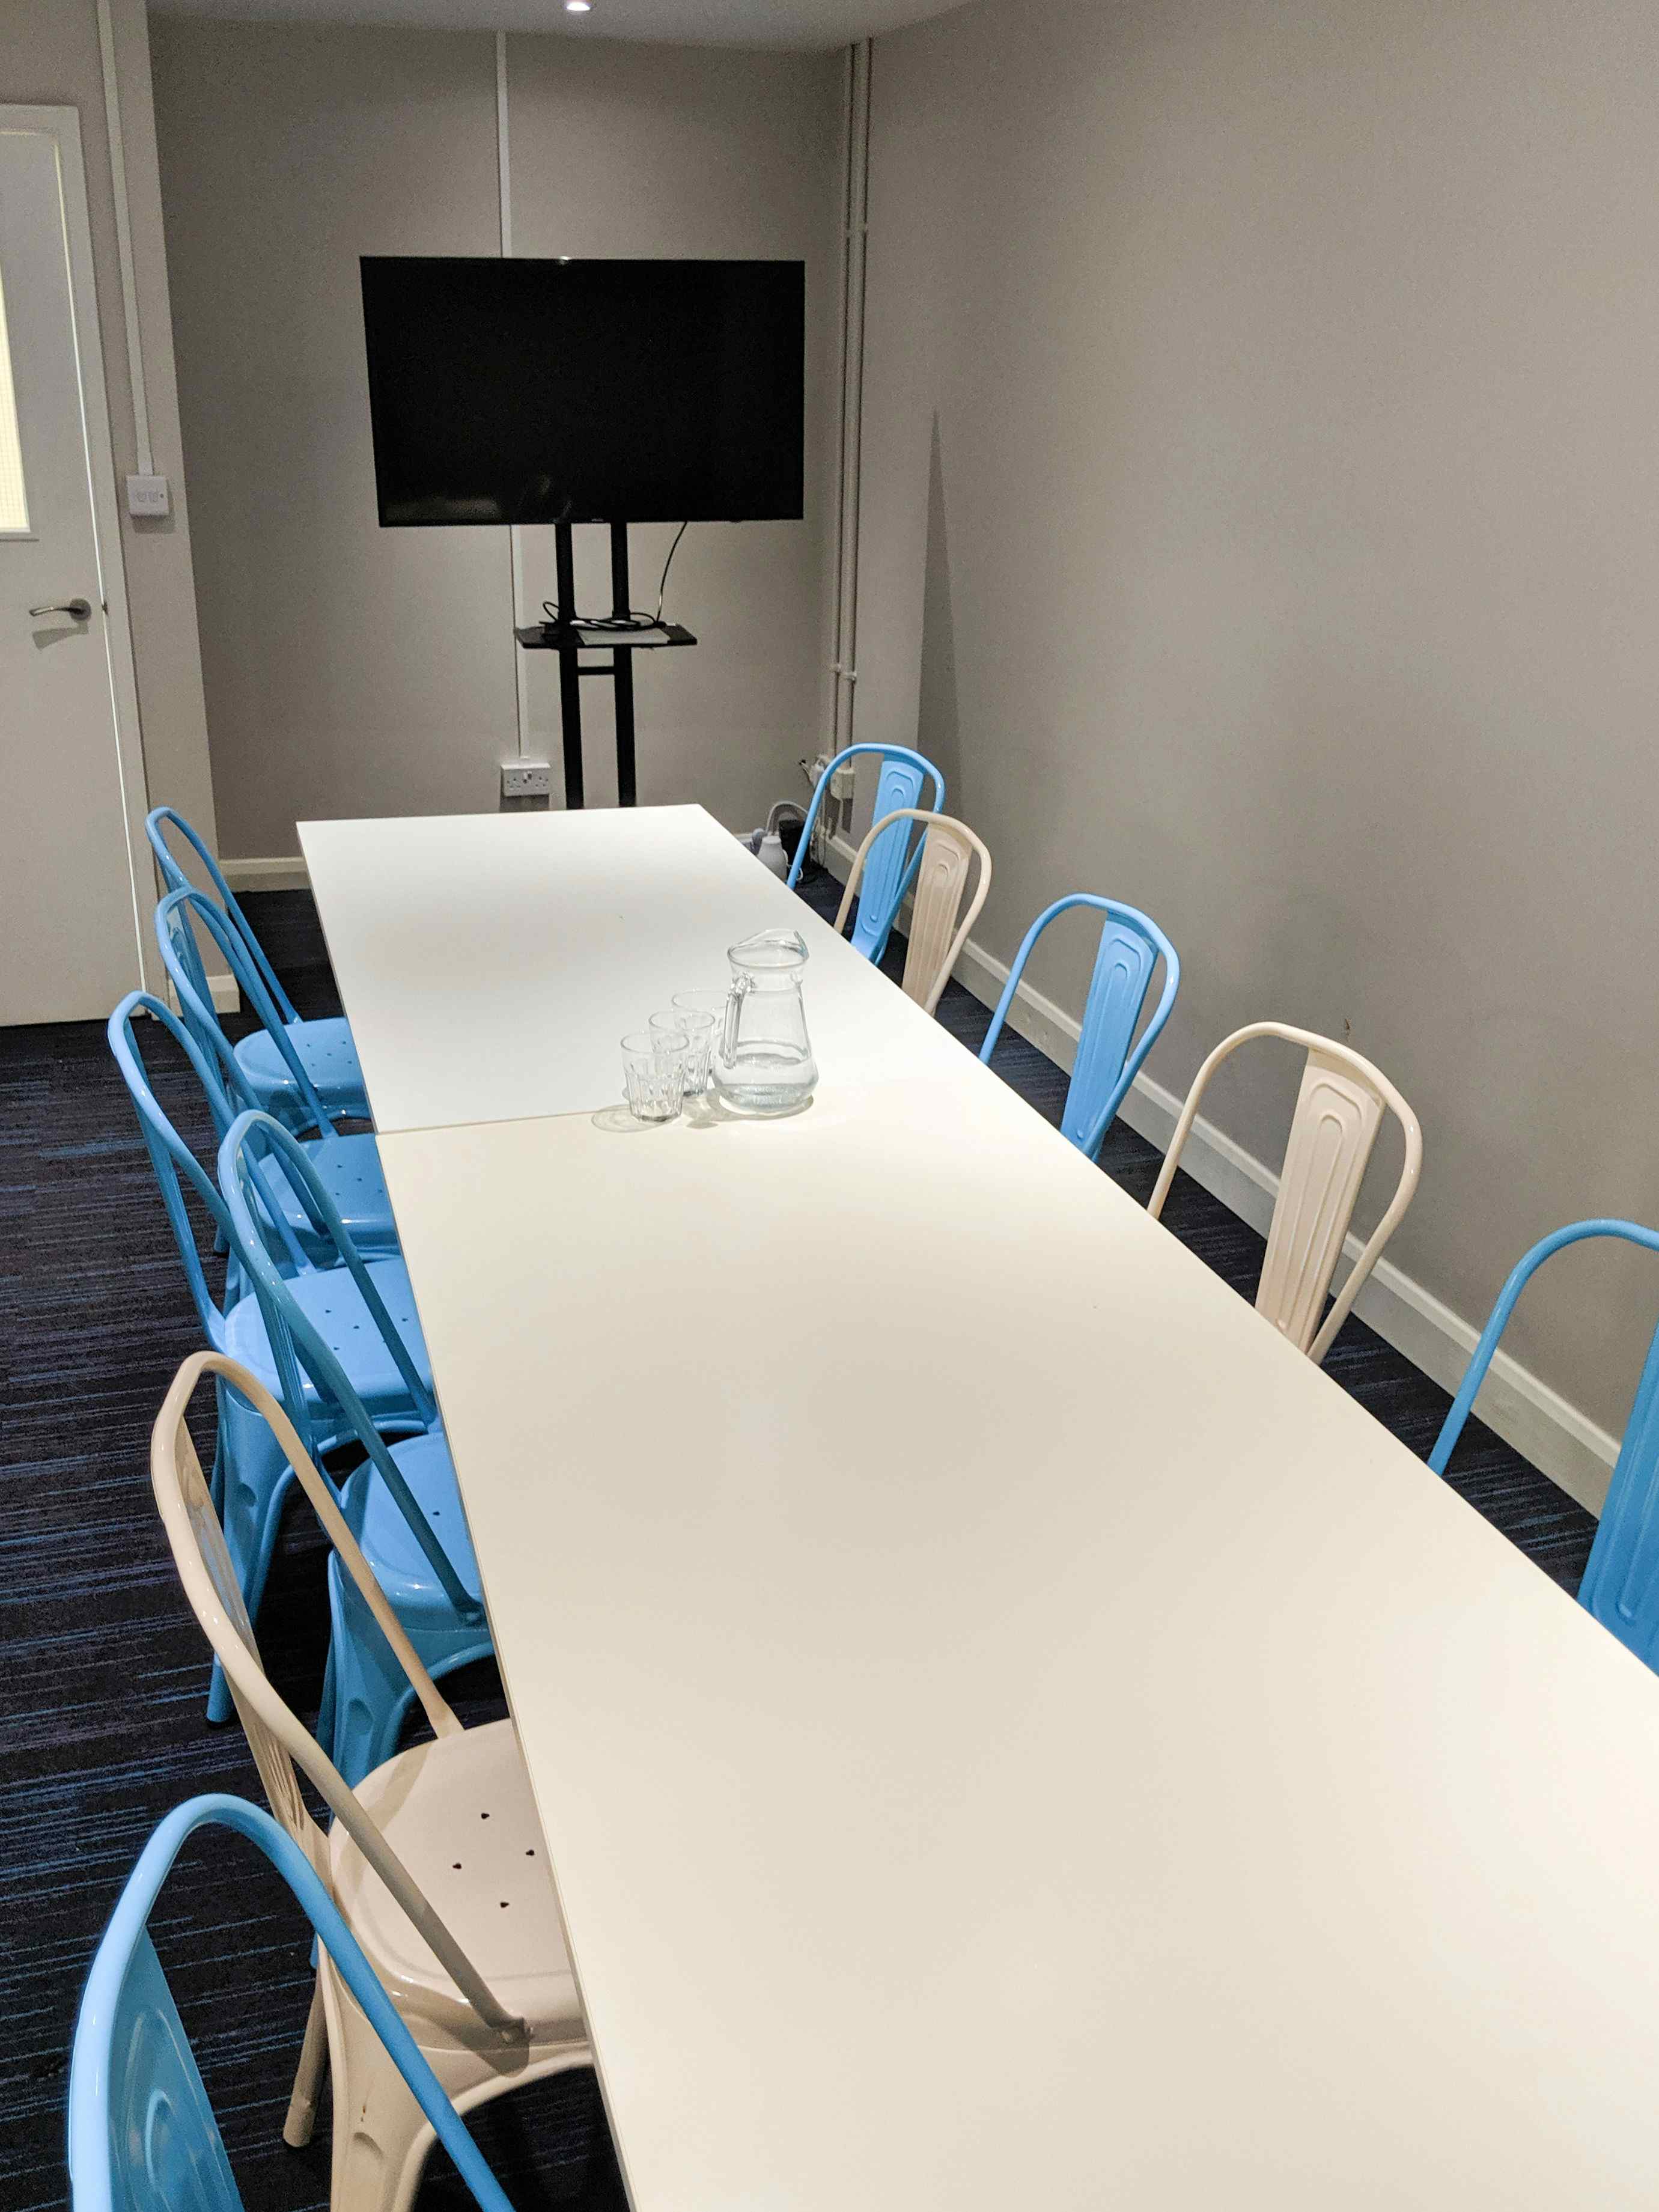 The Meeting Room, The Minded Institute 